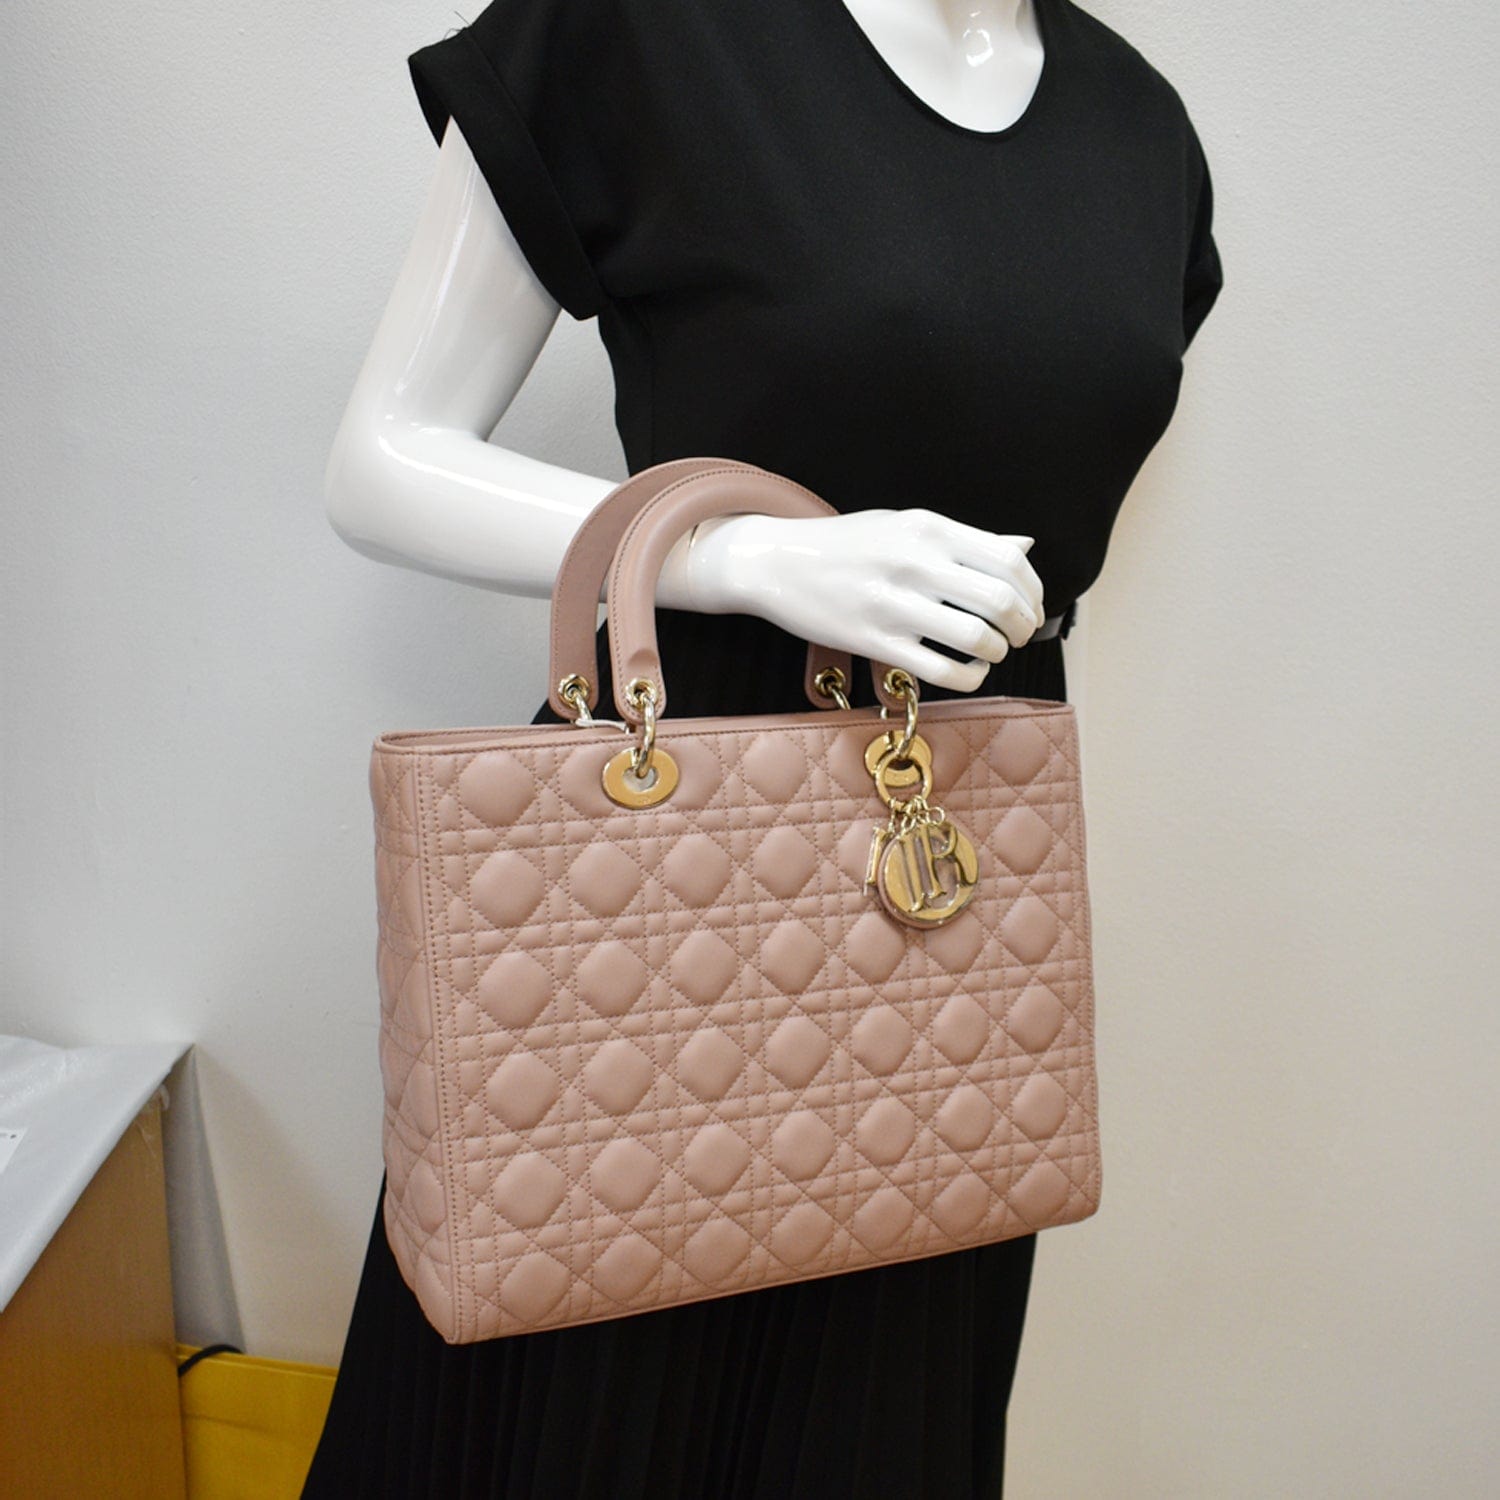 Authentic Second Hand Christian Dior Diorling Cannage Shoulder Bag  PSS32800064  THE FIFTH COLLECTION